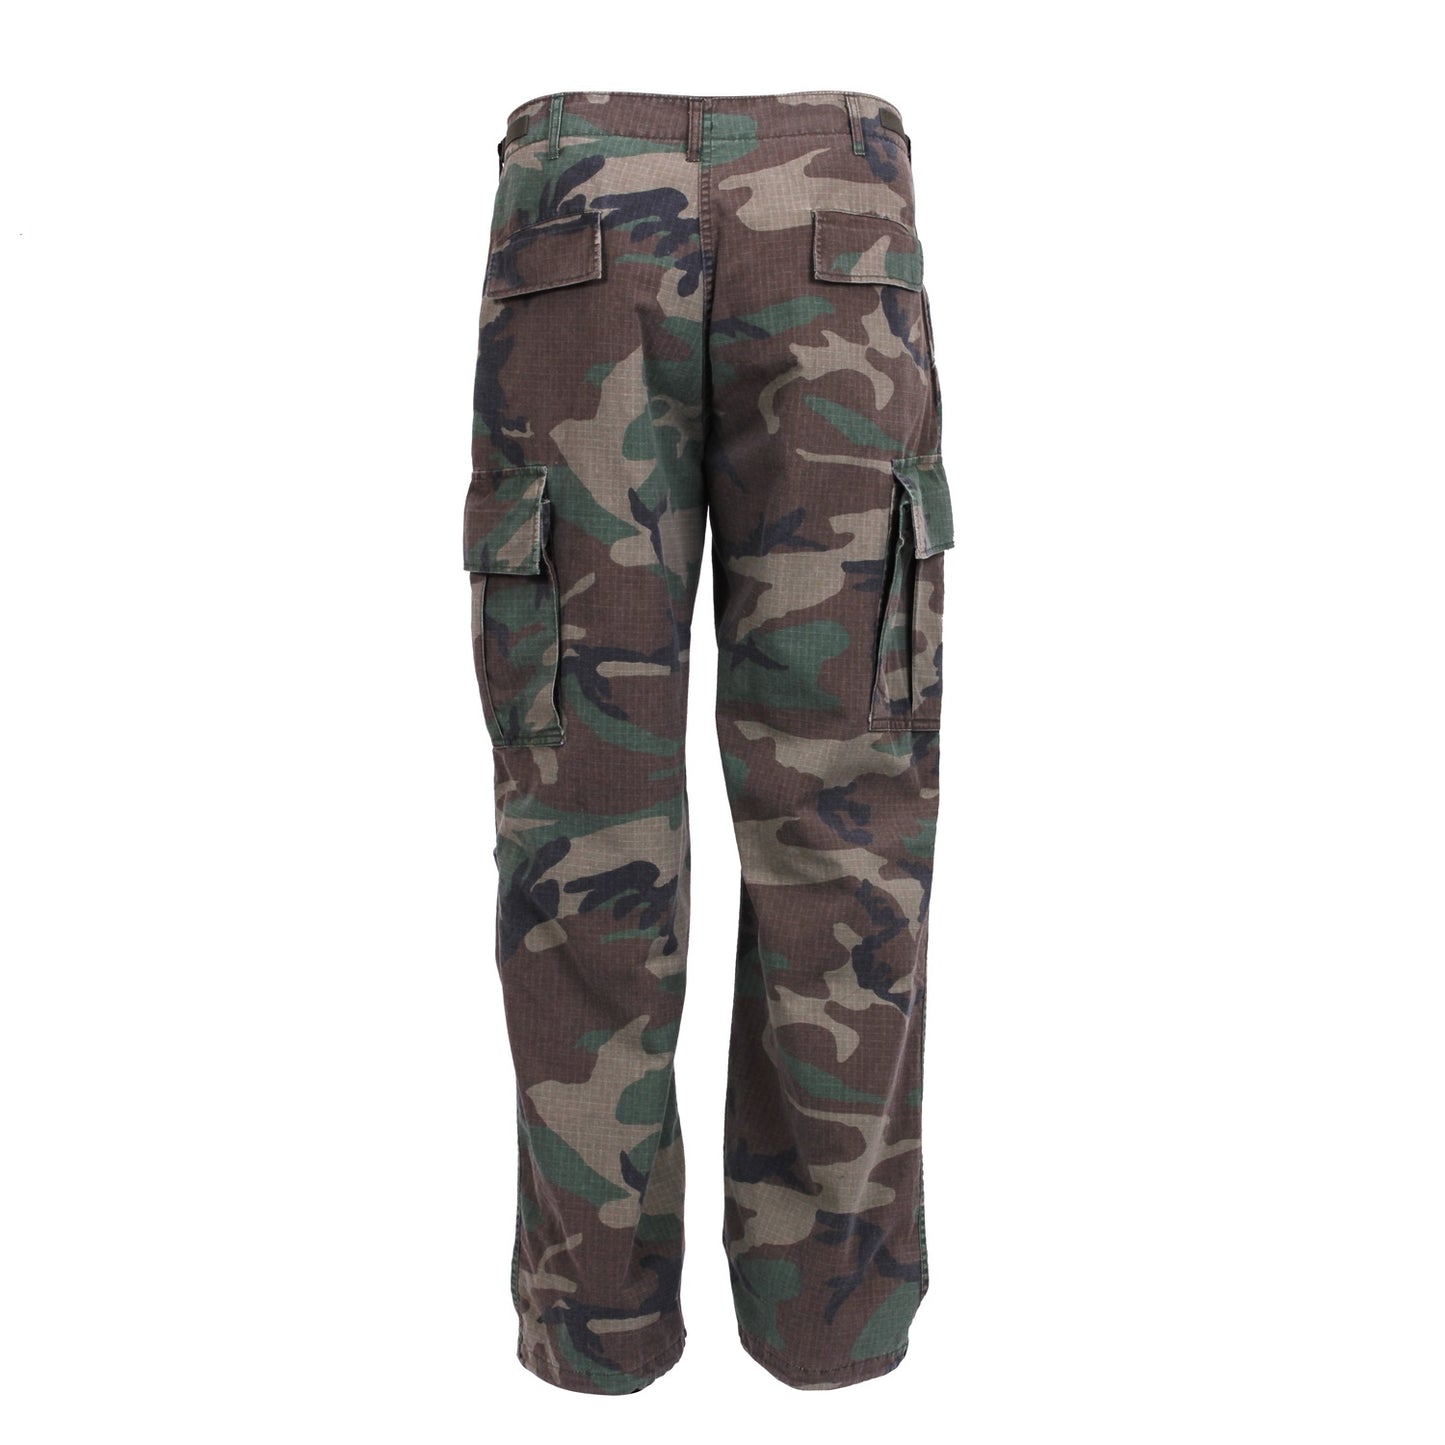 Rothco Vintage Vietnam Style Fatigues - Men's Rip-Stop Pants